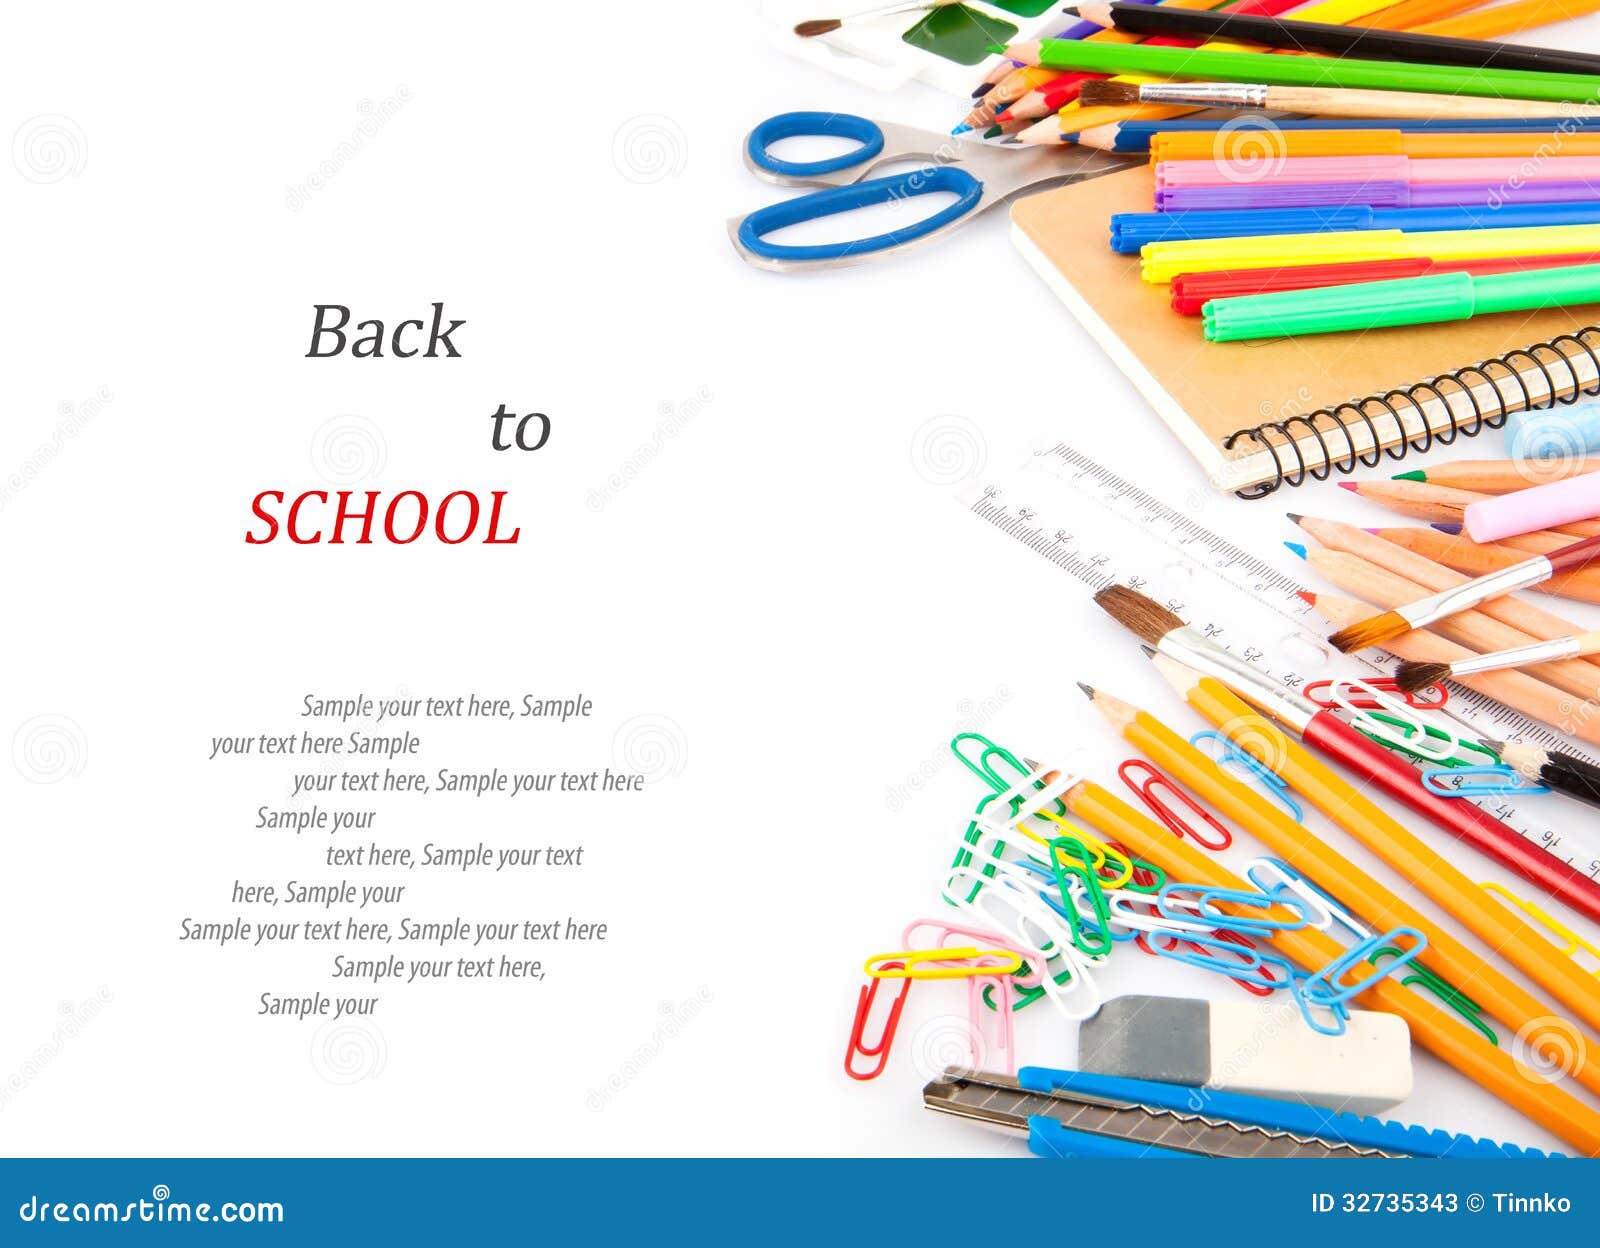 Stationery Back To School Concept Stock Photos Image 32735343